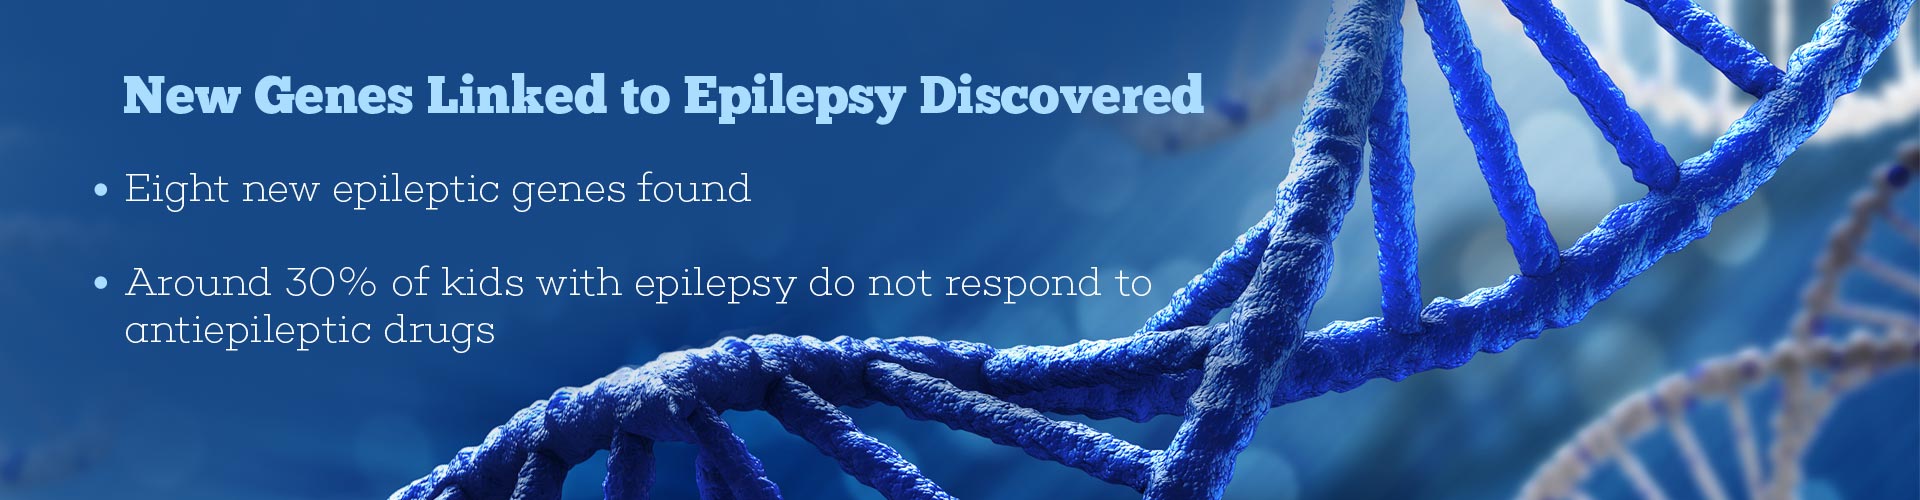 New genes linked to epilepsy discovered
- Eight new epileptic genes found
- Around 30% of kids with epilepsy do not respond to anti-epileptic drugs